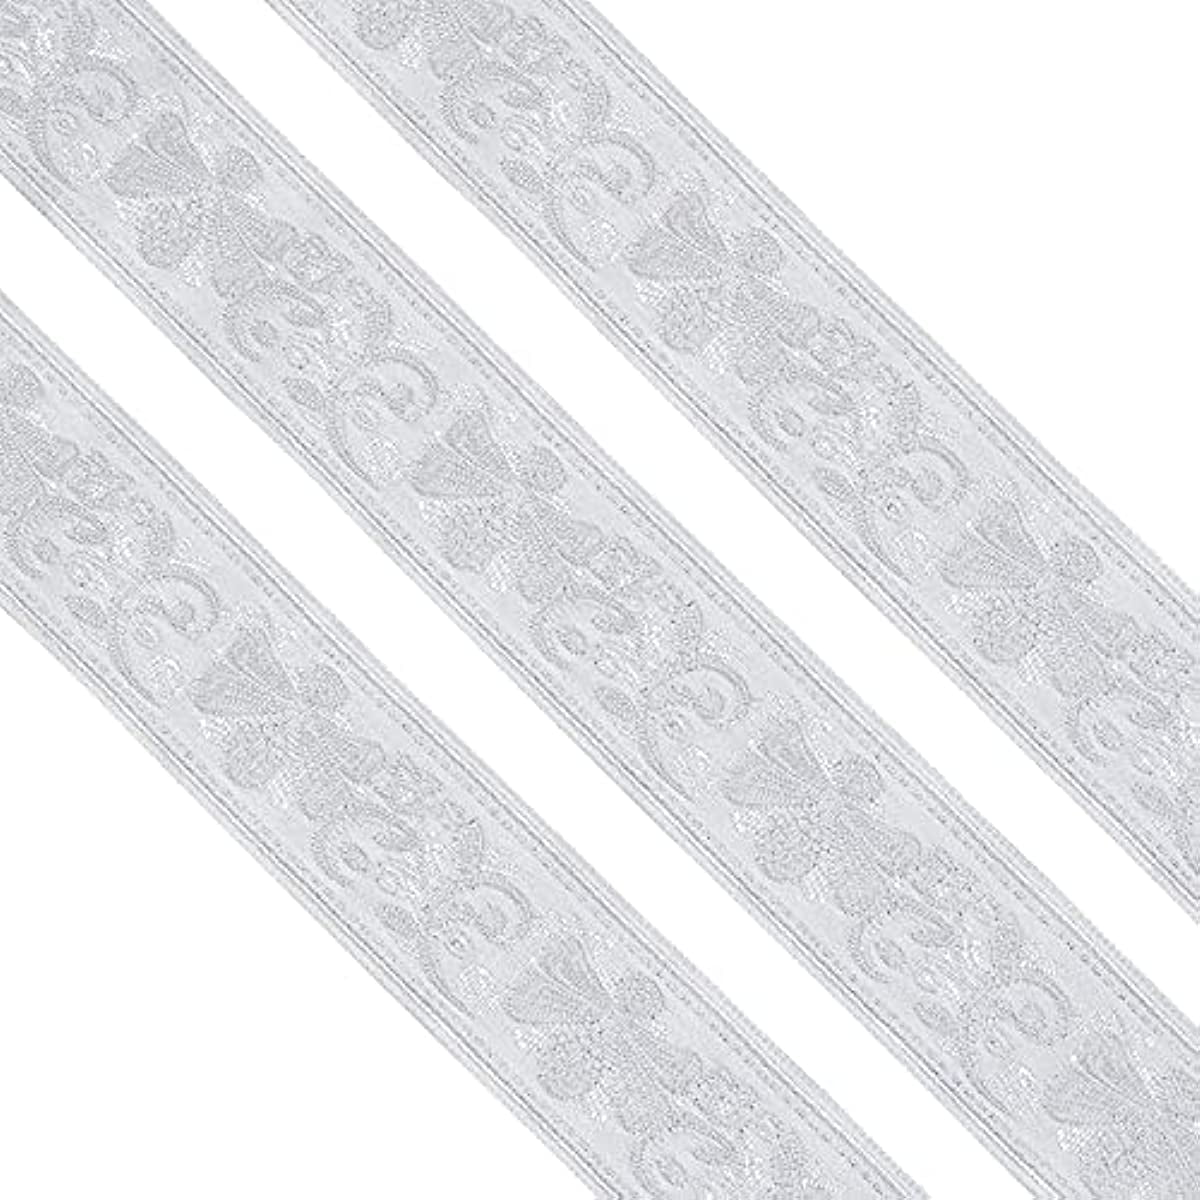 5Yard Cotton Lace White Beige Embroidered Lace Ribbon Non Stretch Trim  Fabric For DIY Sewing Accessories Clothing Appliques